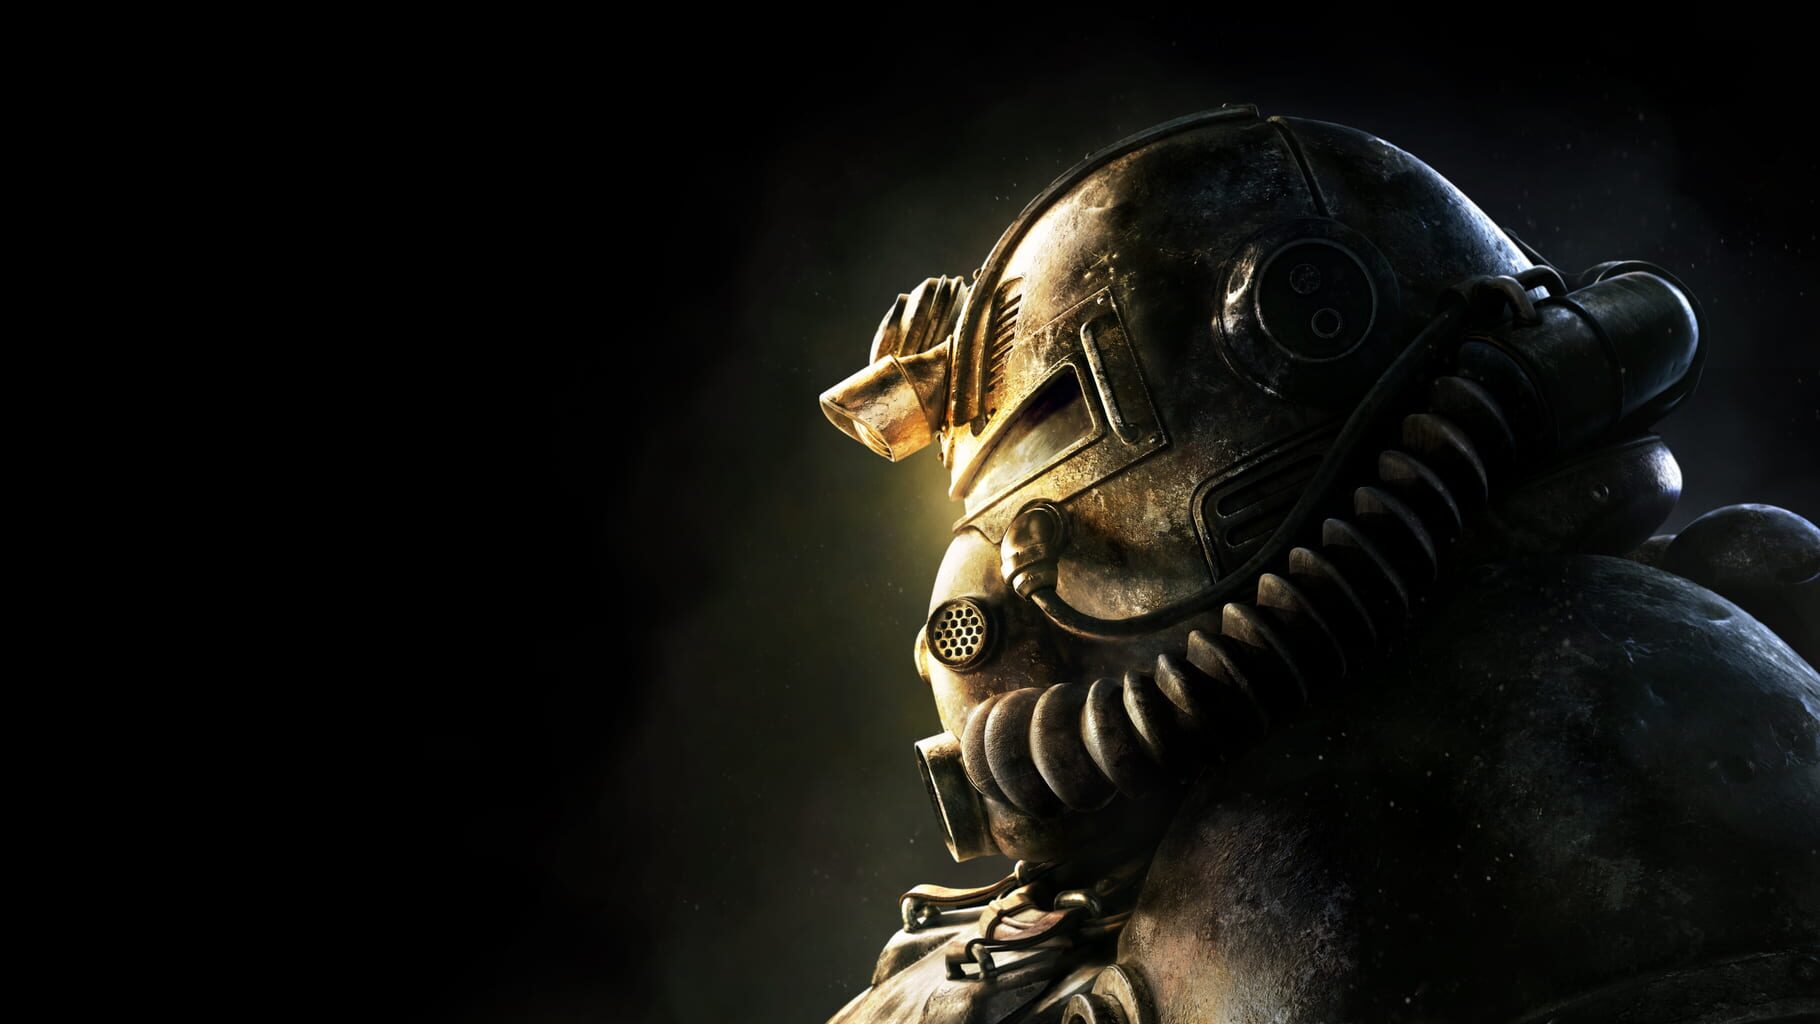 Artwork for Fallout 76